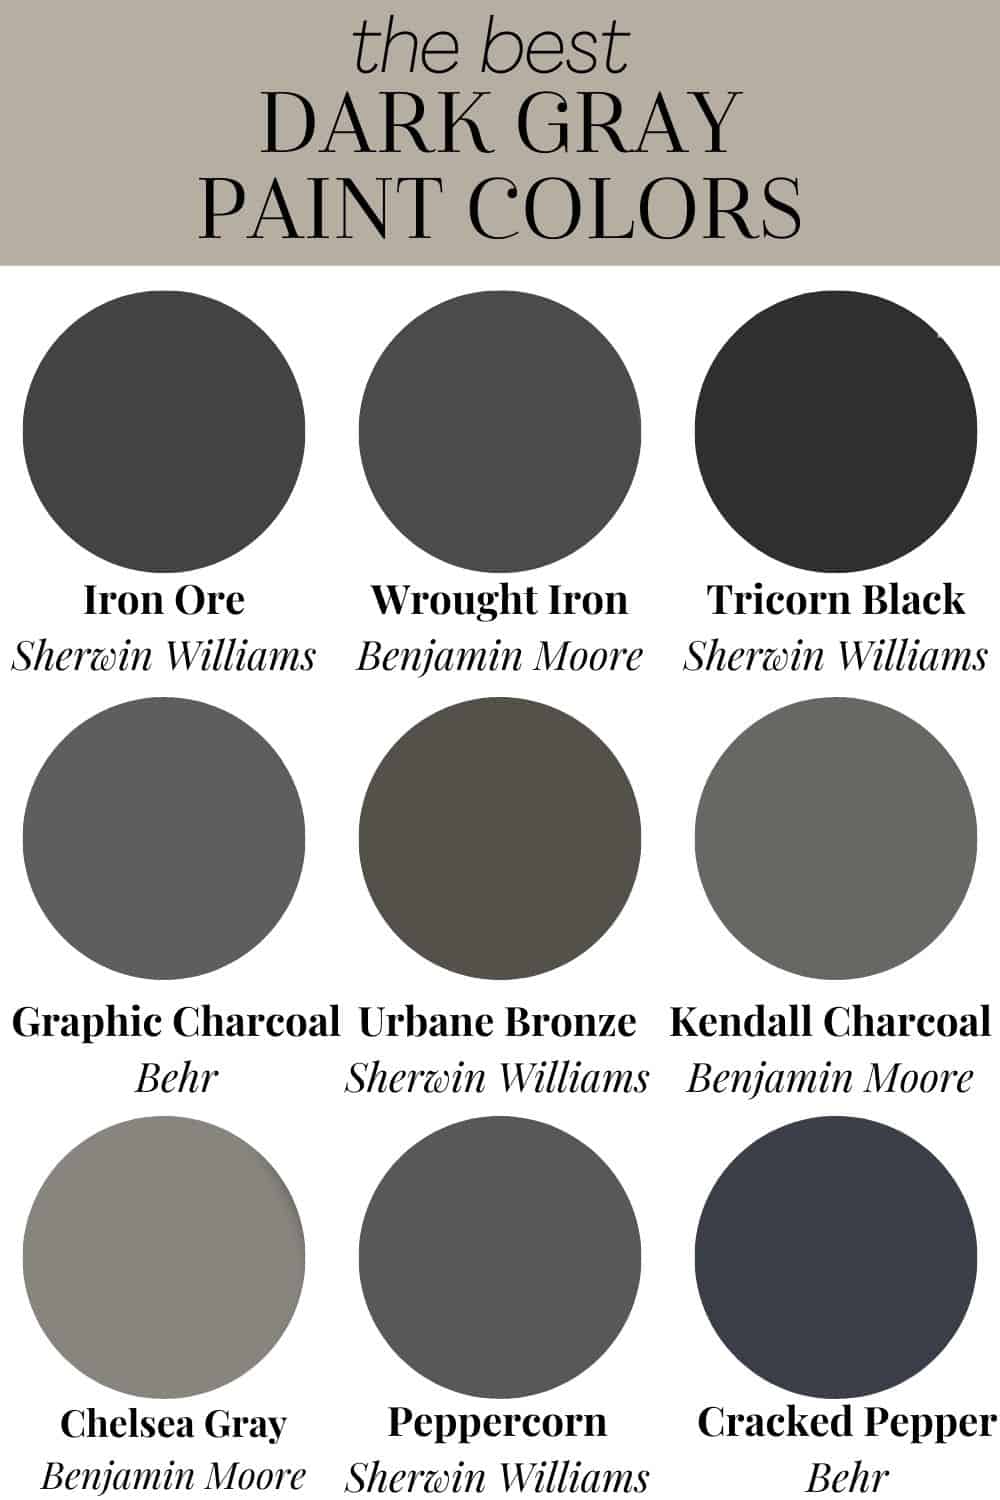 Trendy and Timeless Dark Gray Paint Colors for Your Home